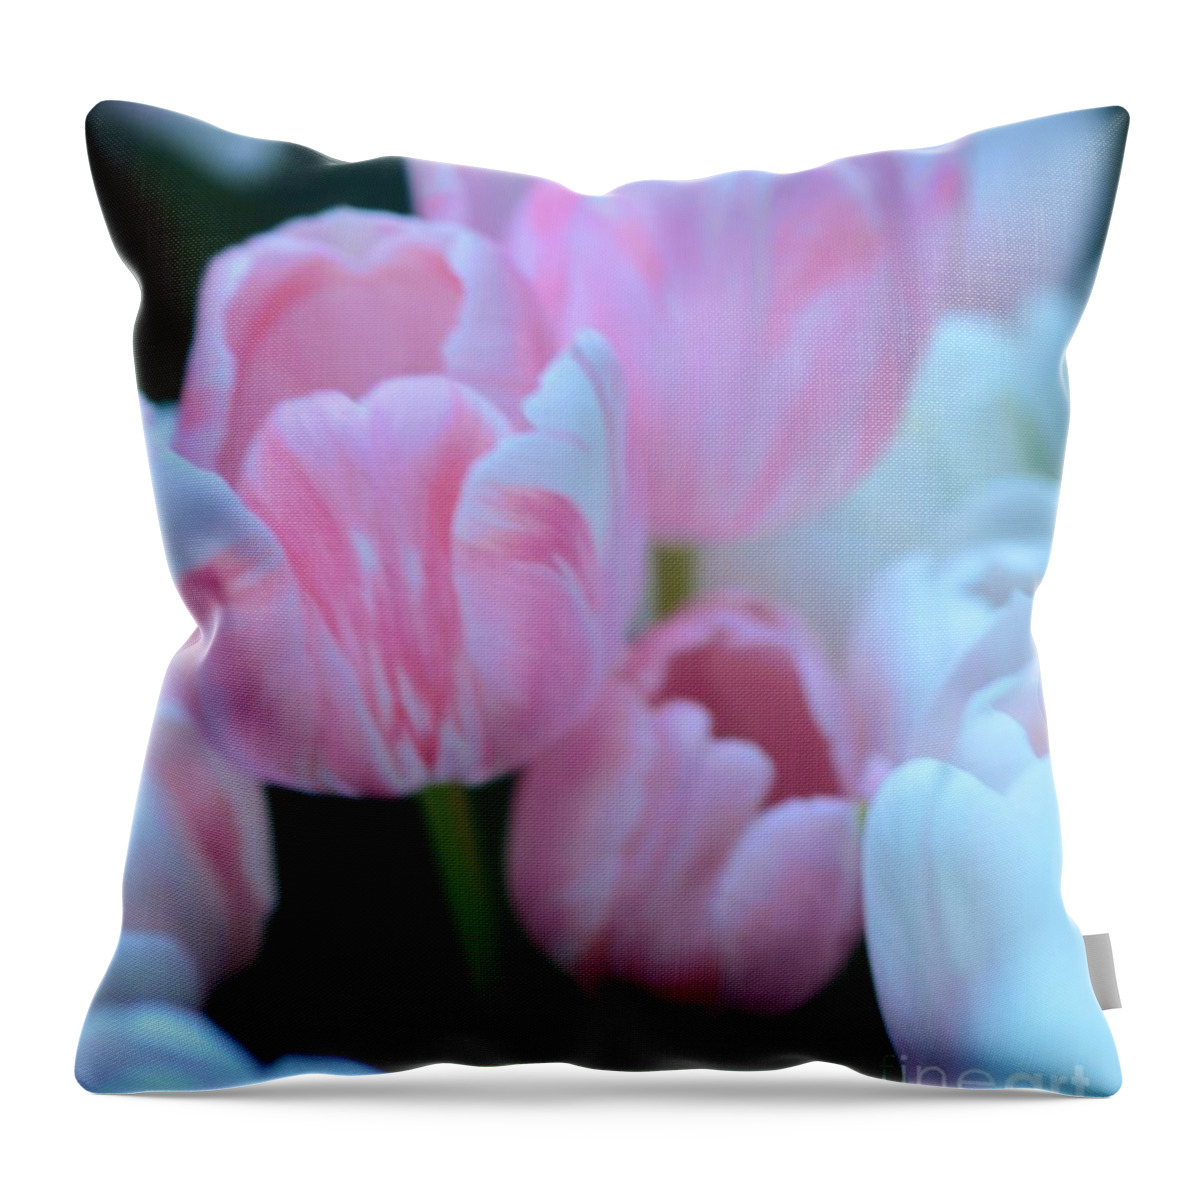 Tulip Throw Pillow featuring the photograph Pink And White Tulips by Kathleen Struckle